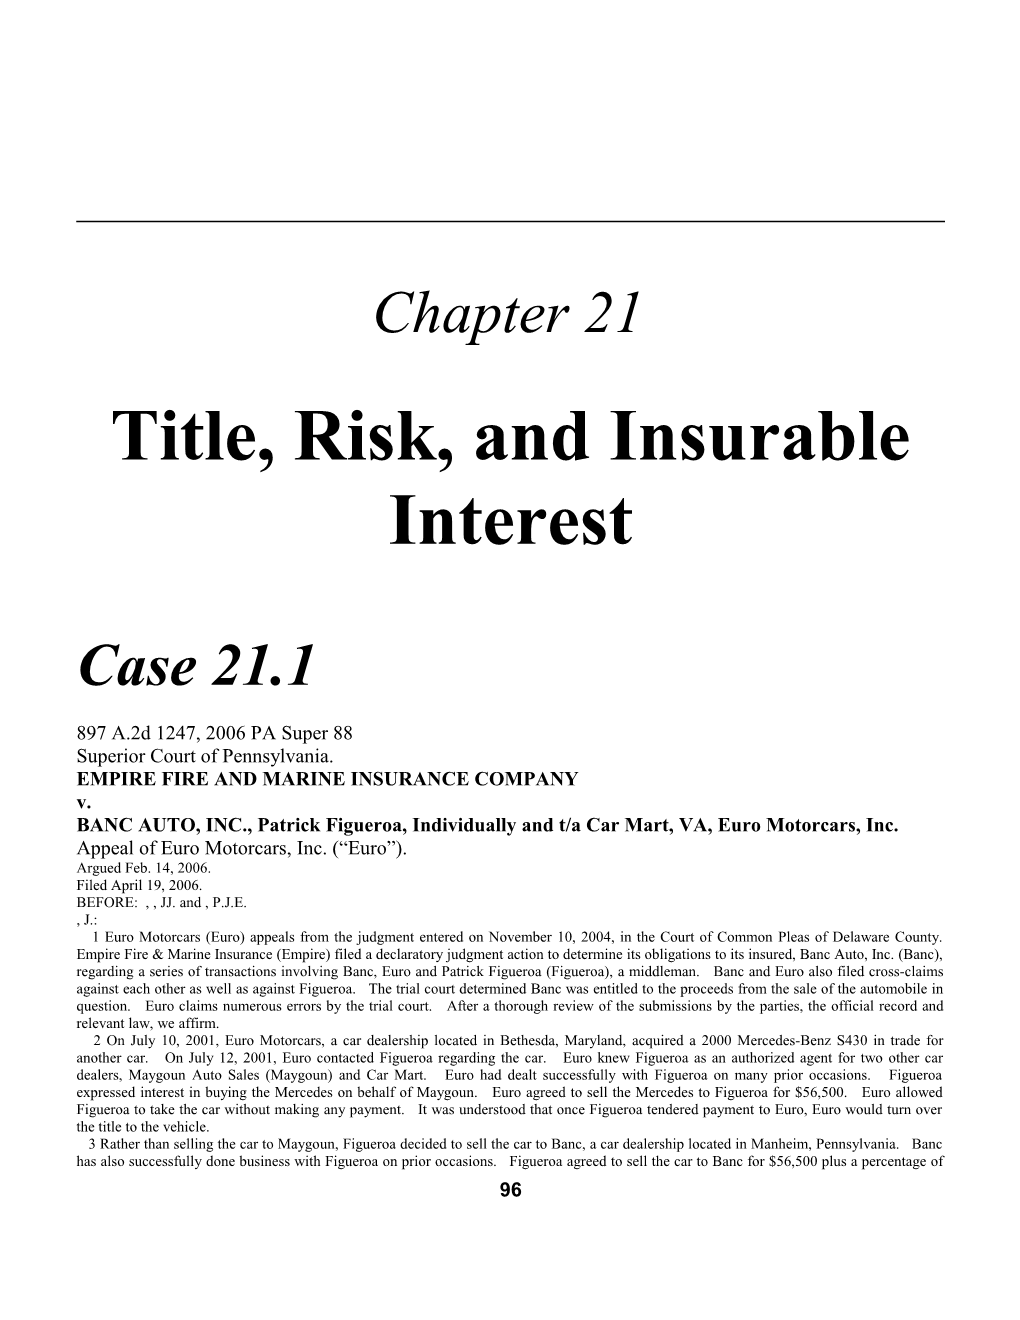 Chapter 21: Title, Risk, and Insurable Interest 365